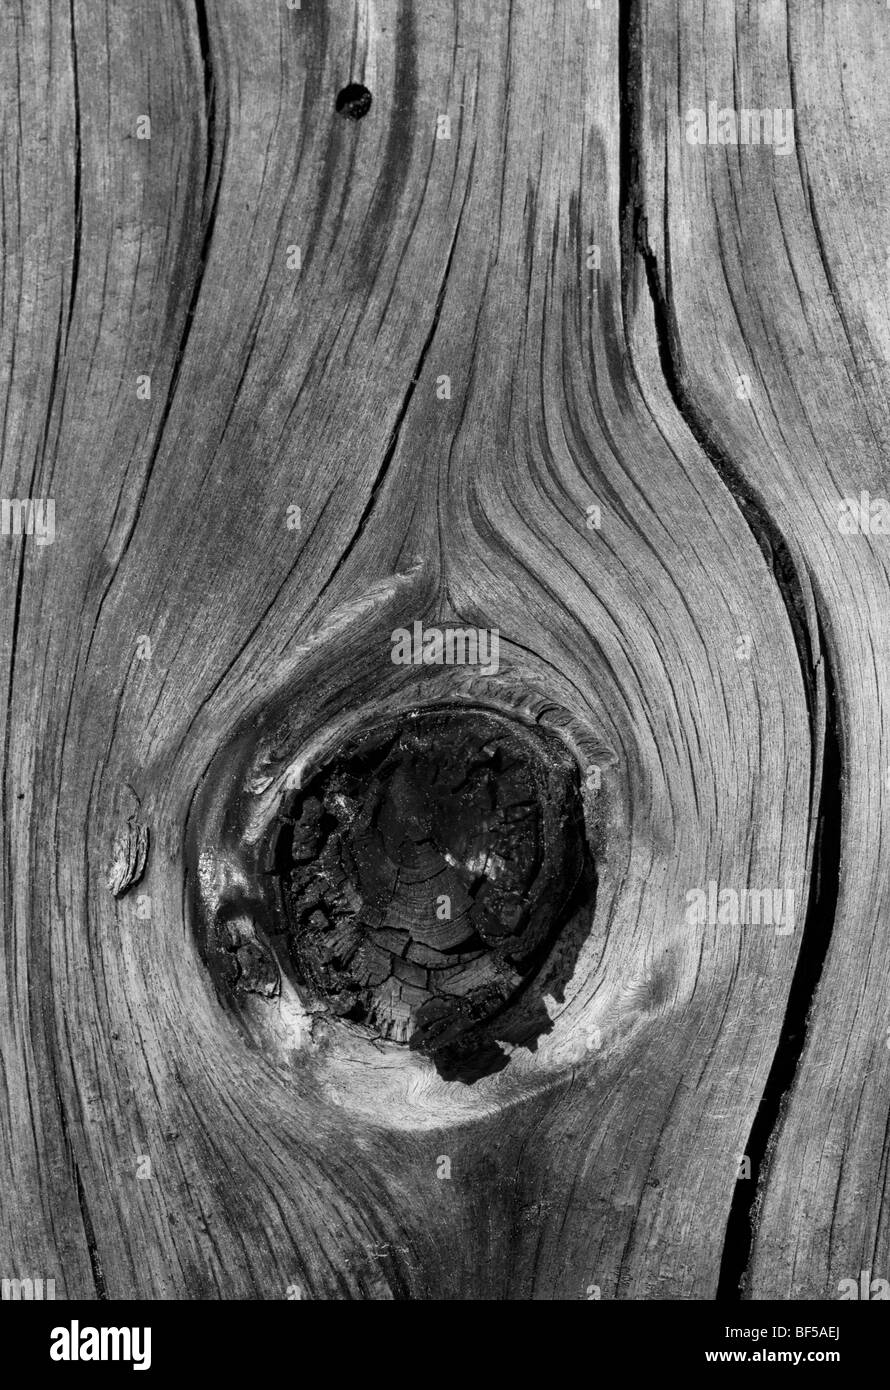 Graphic image of a fire-damaged pine tree knot on a dead bleached trunk showing charred branch stub Stock Photo